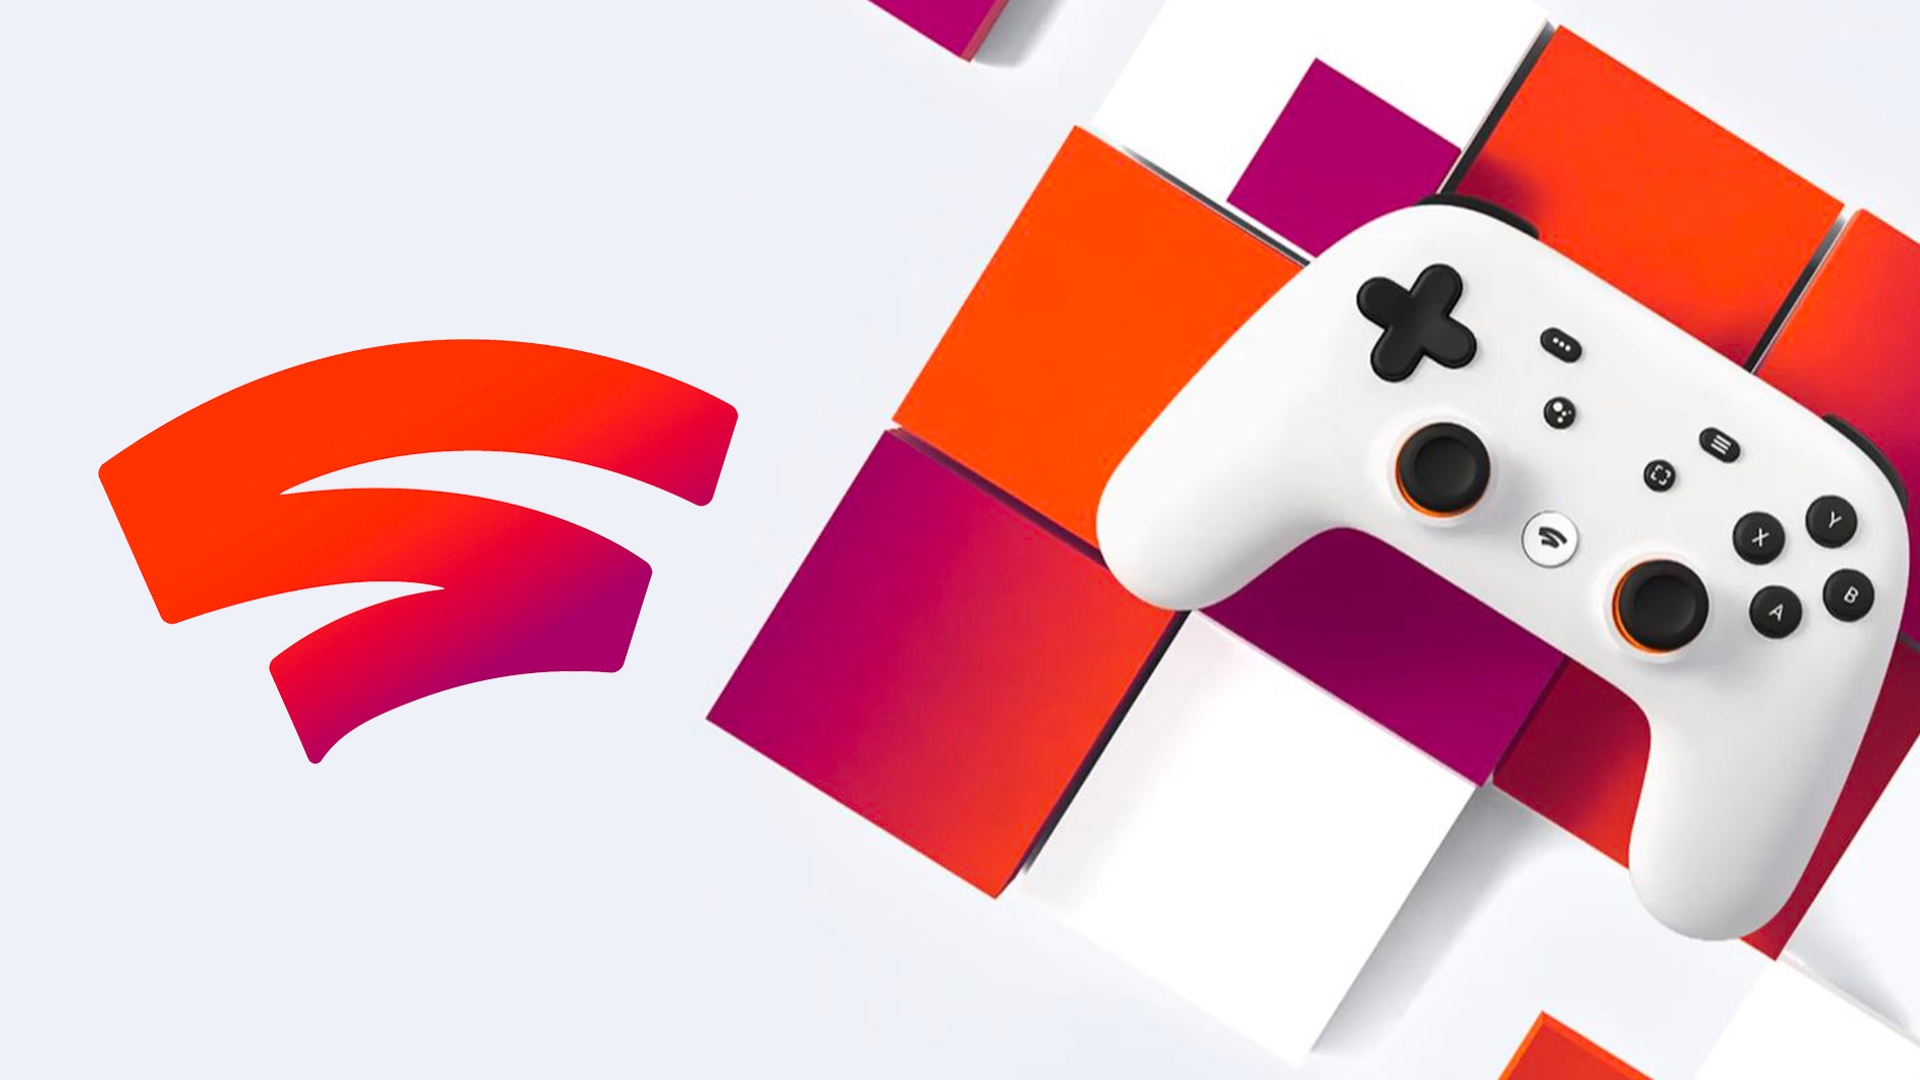 Google Stadia launch details have been unveiled